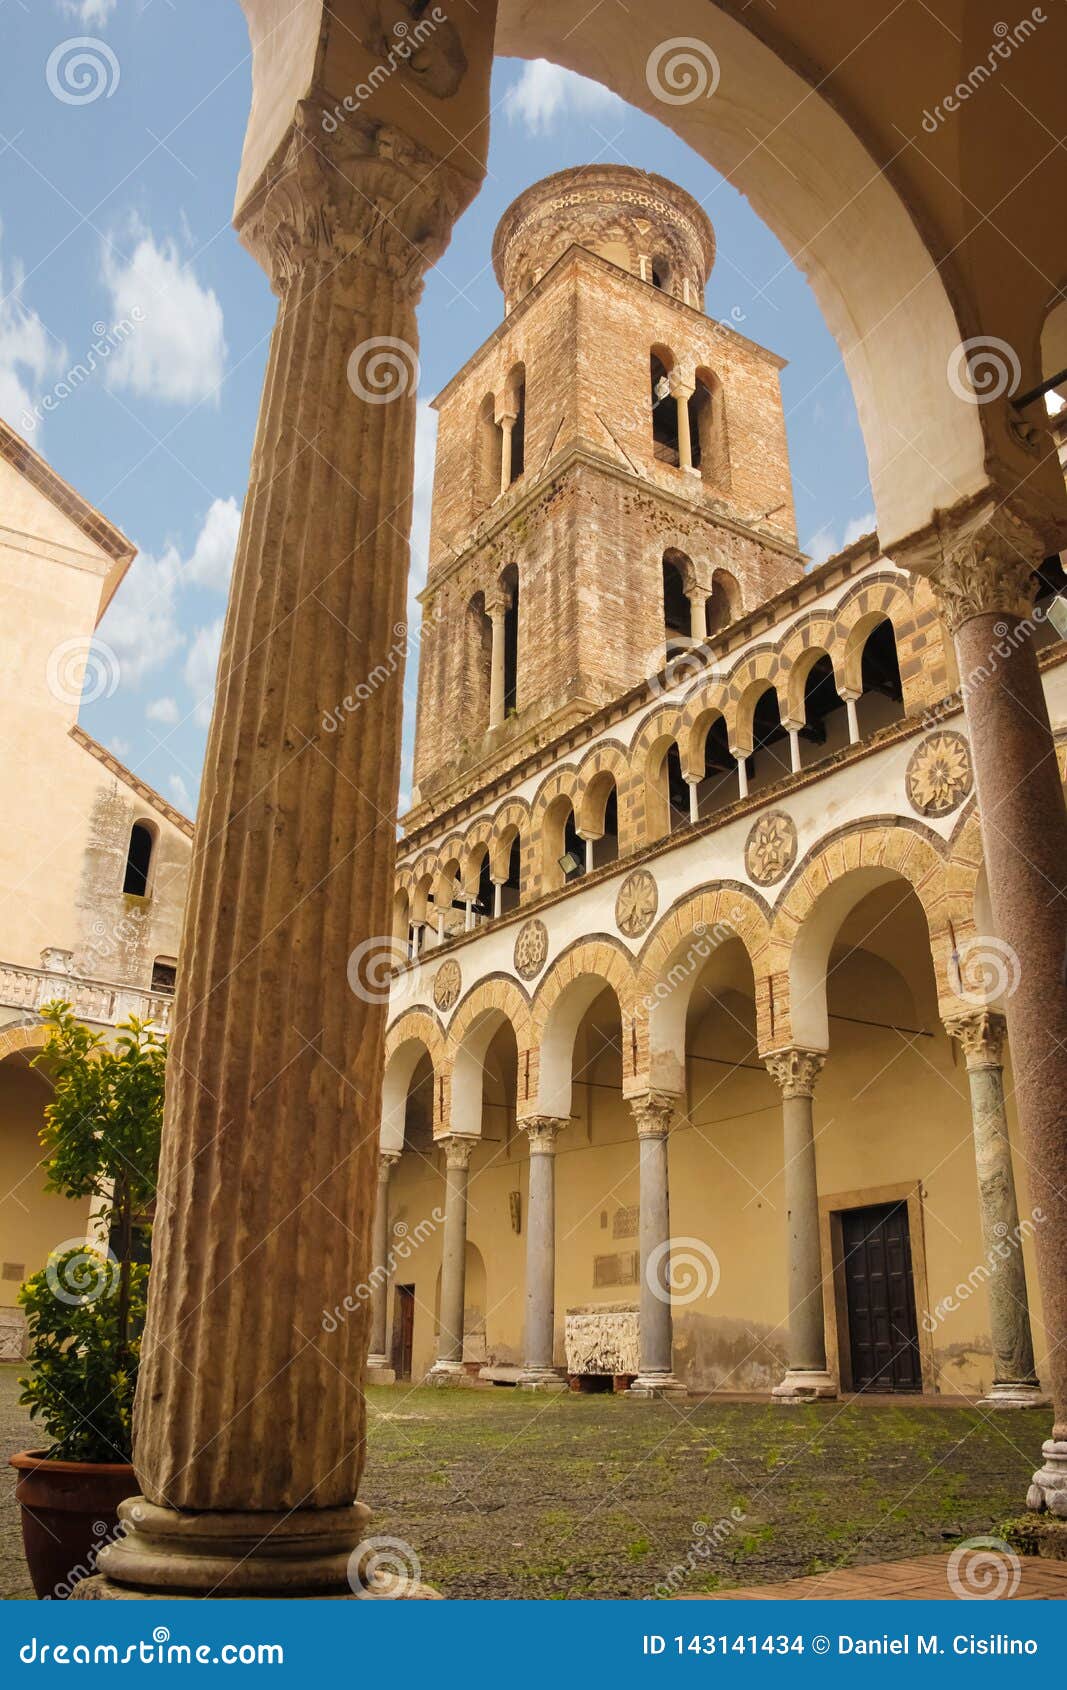 cloister and bell tower. cathedral, salerno. italy